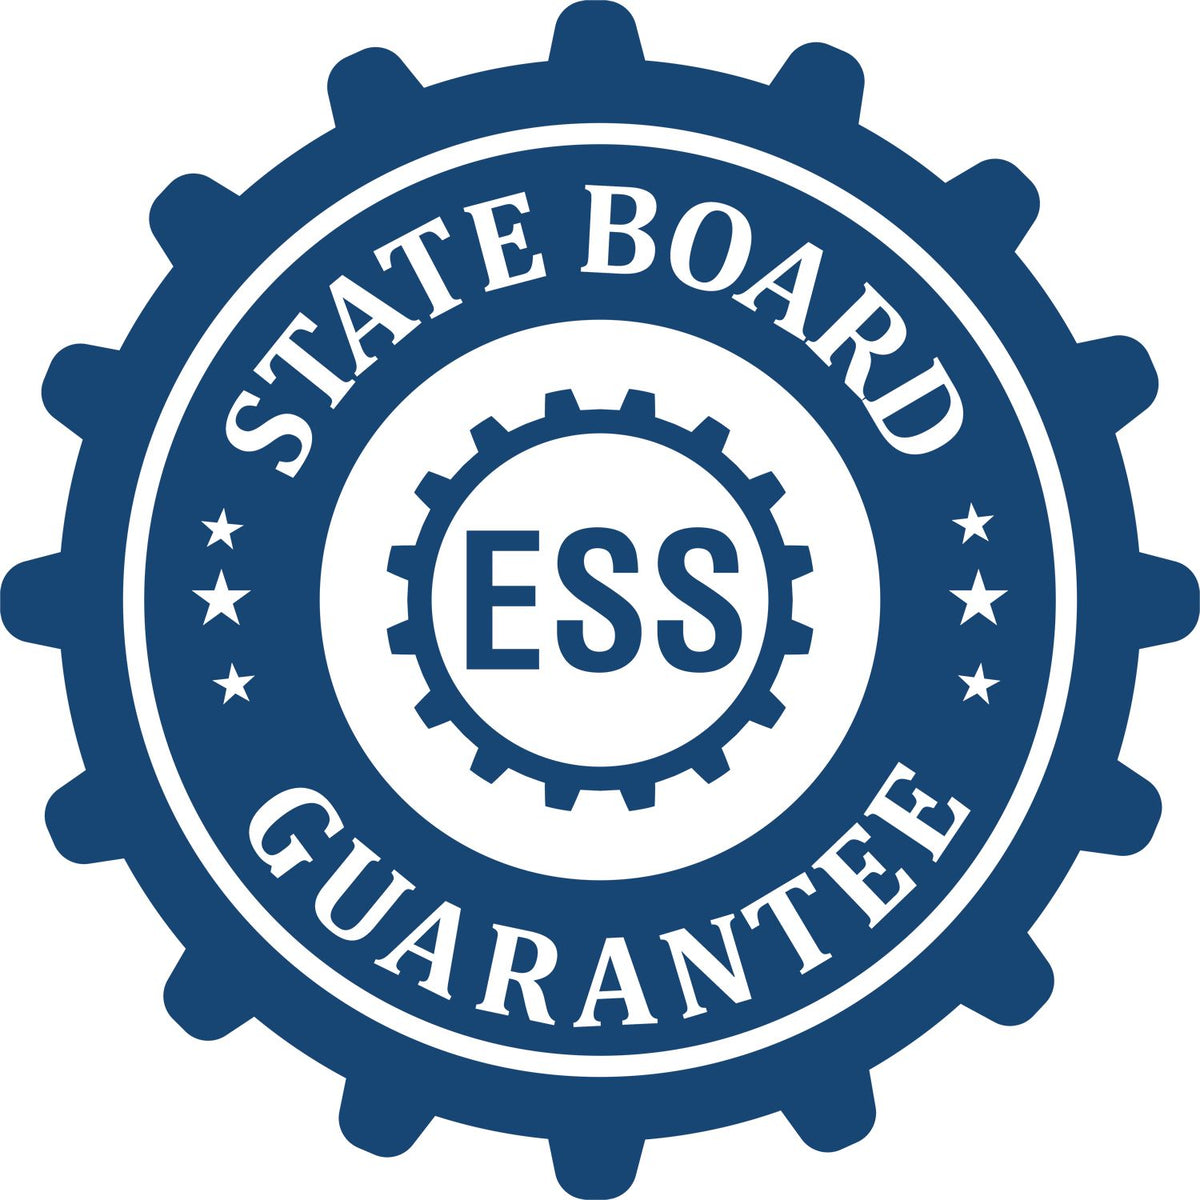 An emblem in a gear shape illustrating a state board guarantee for the Louisiana Engineer Desk Seal product.